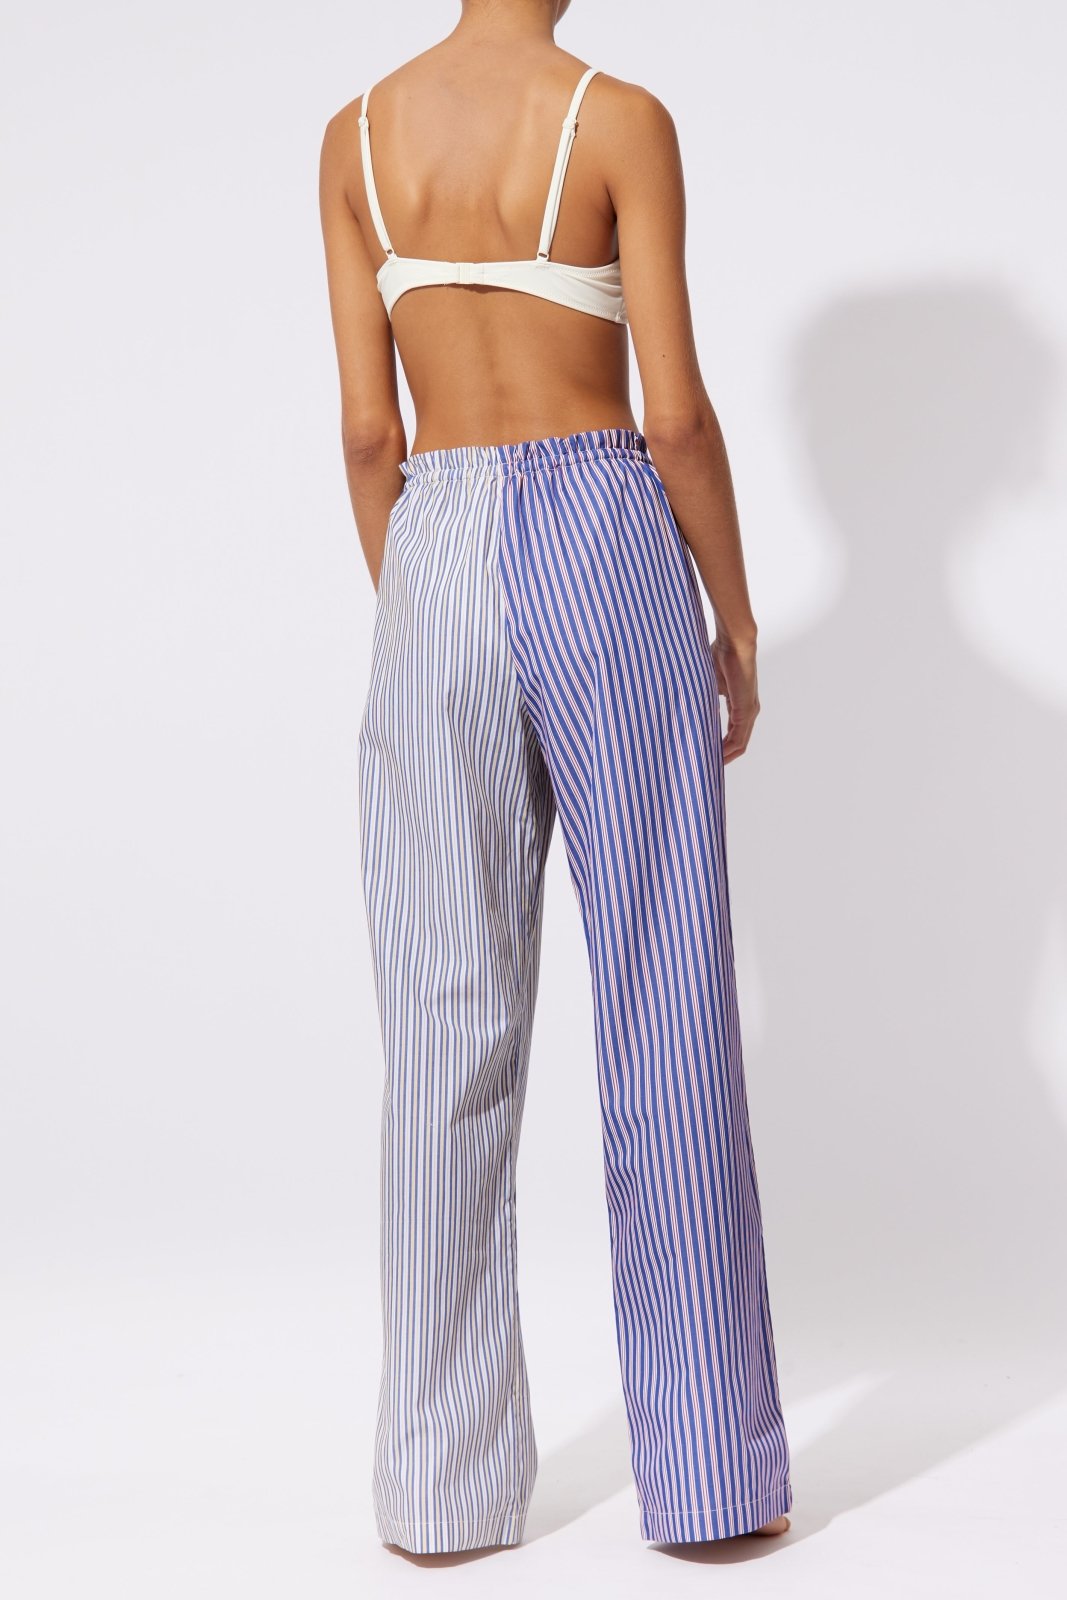 The Allegra Pant - Solid & Striped